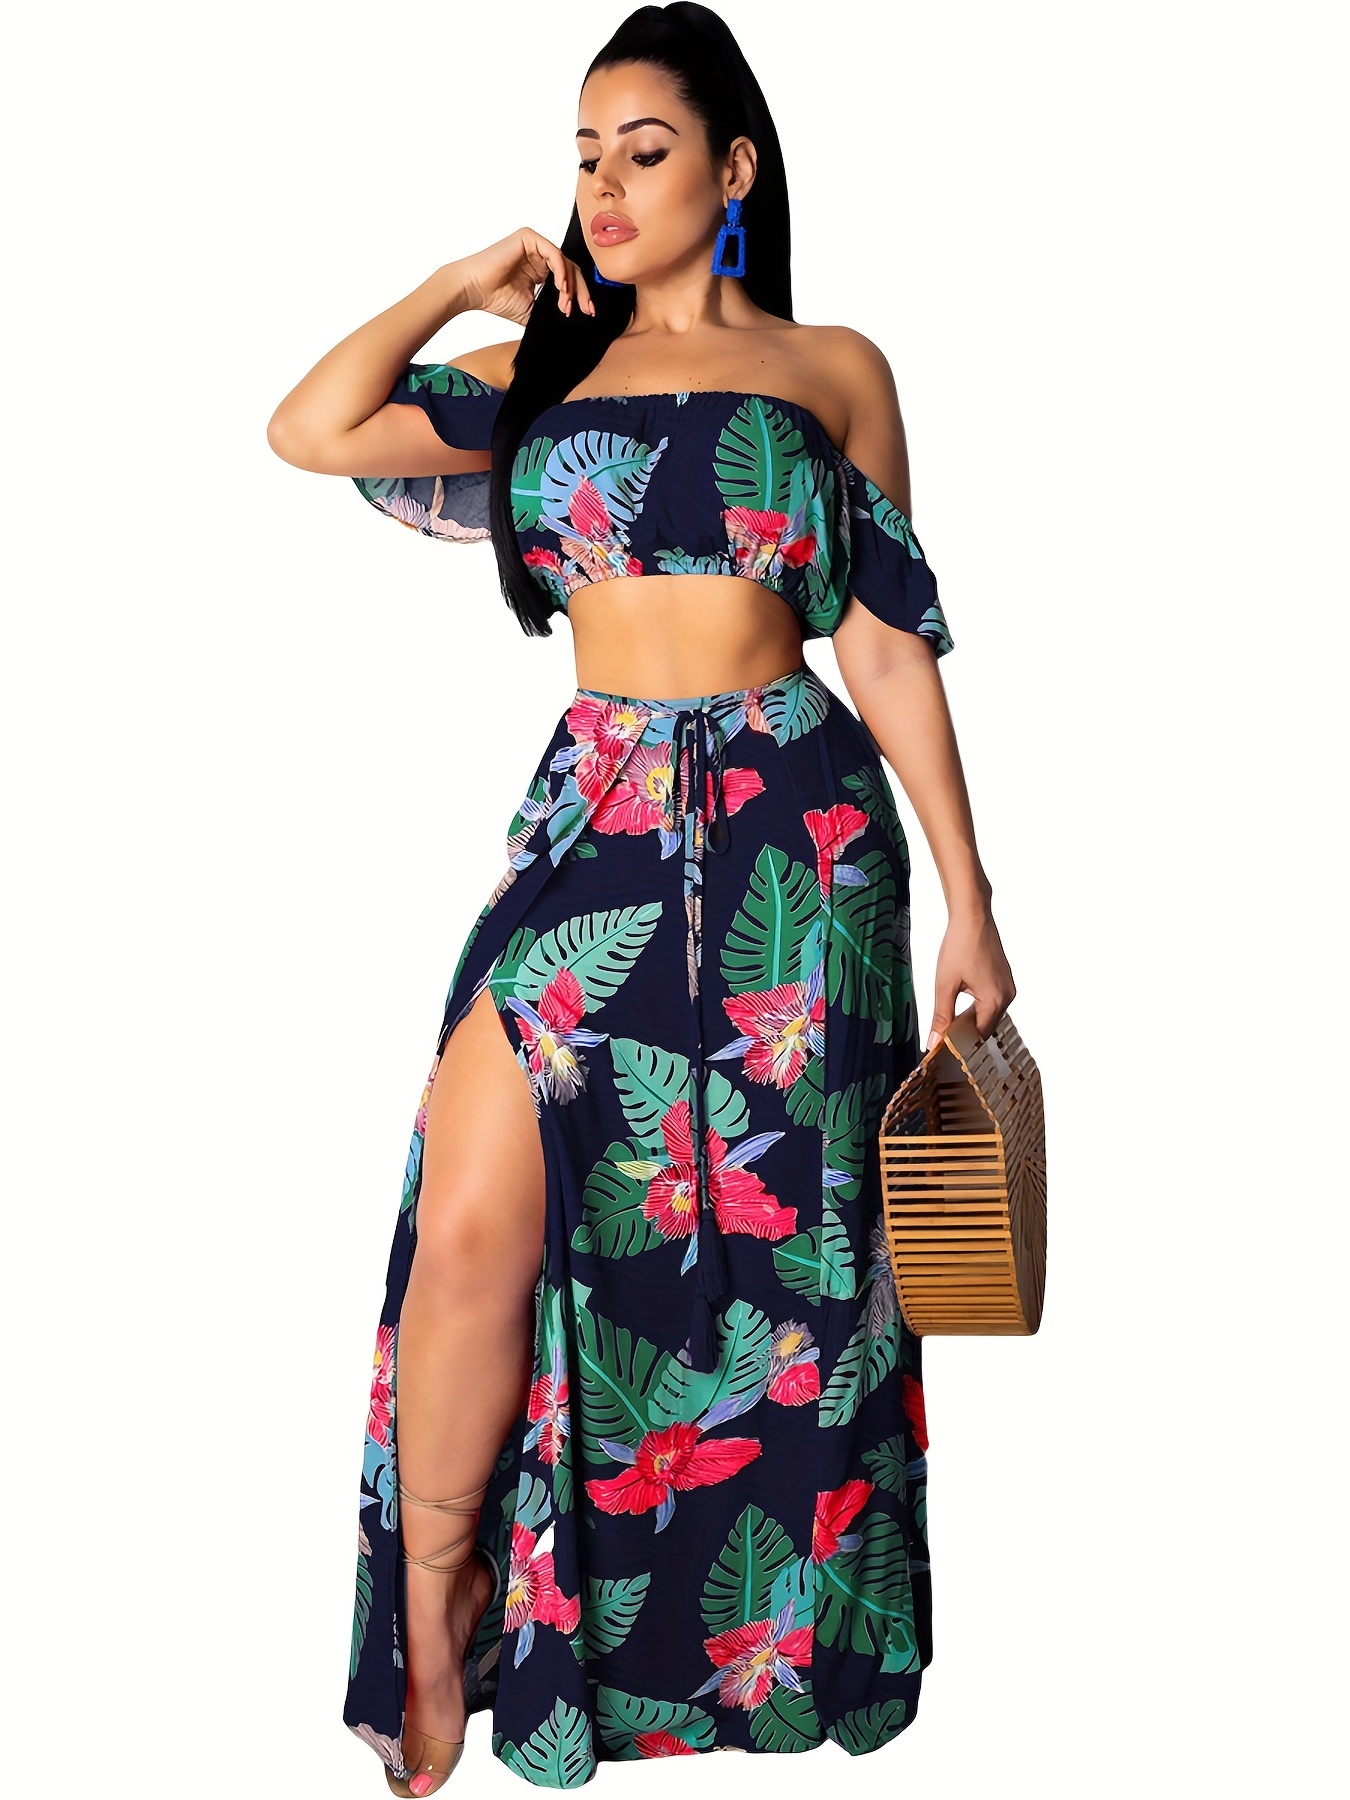 2 Piece Set Women's Crop Top Skirt Side Slit Two Piece Outfit